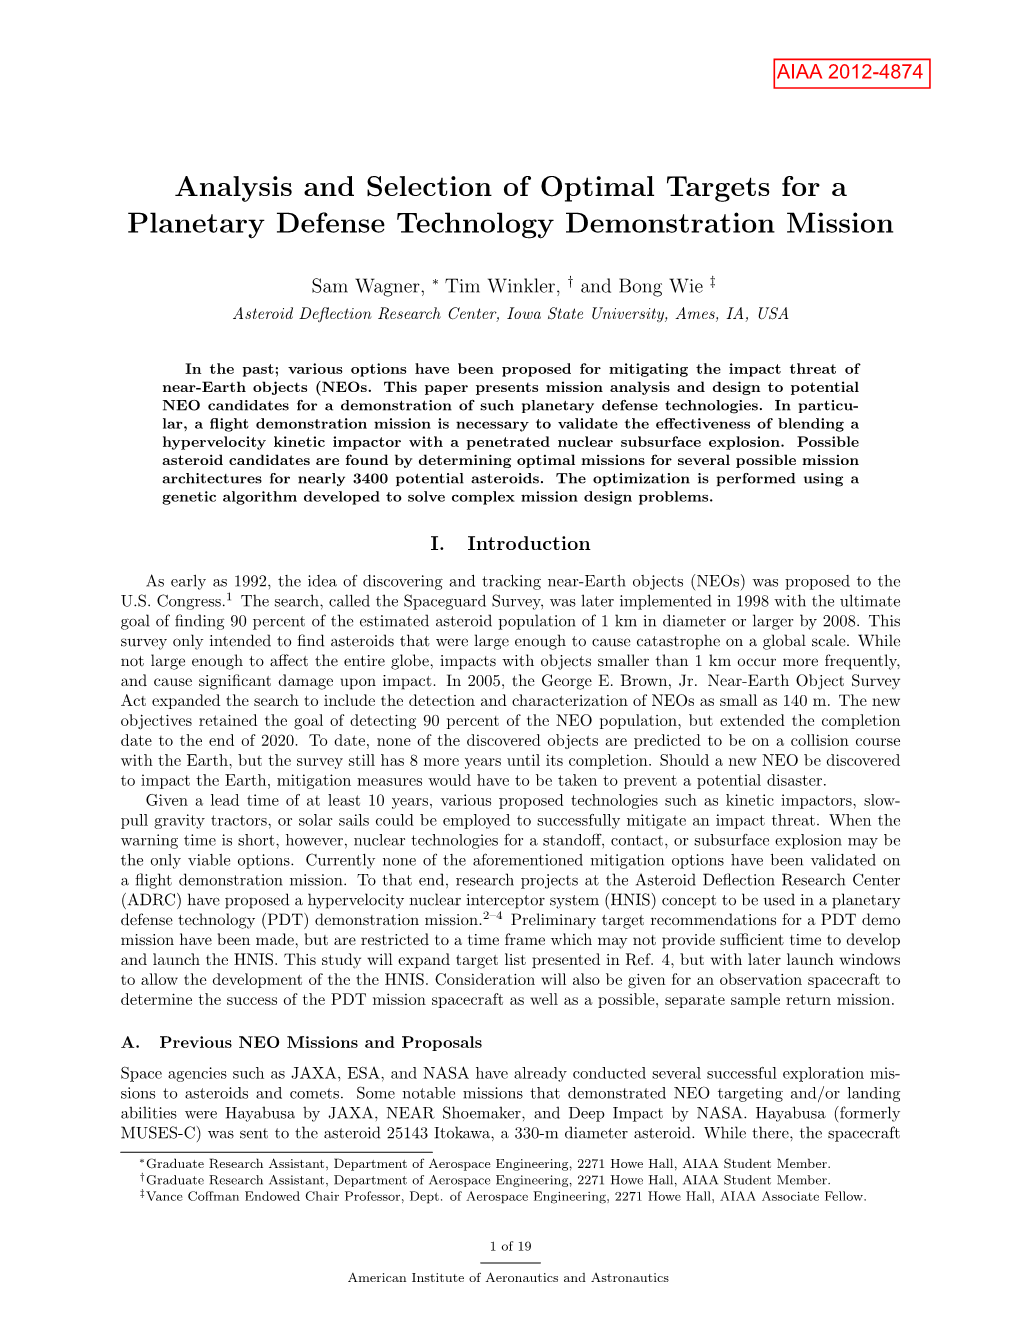 Analysis and Selection of Optimal Targets for a Planetary Defense Technology Demonstration Mission